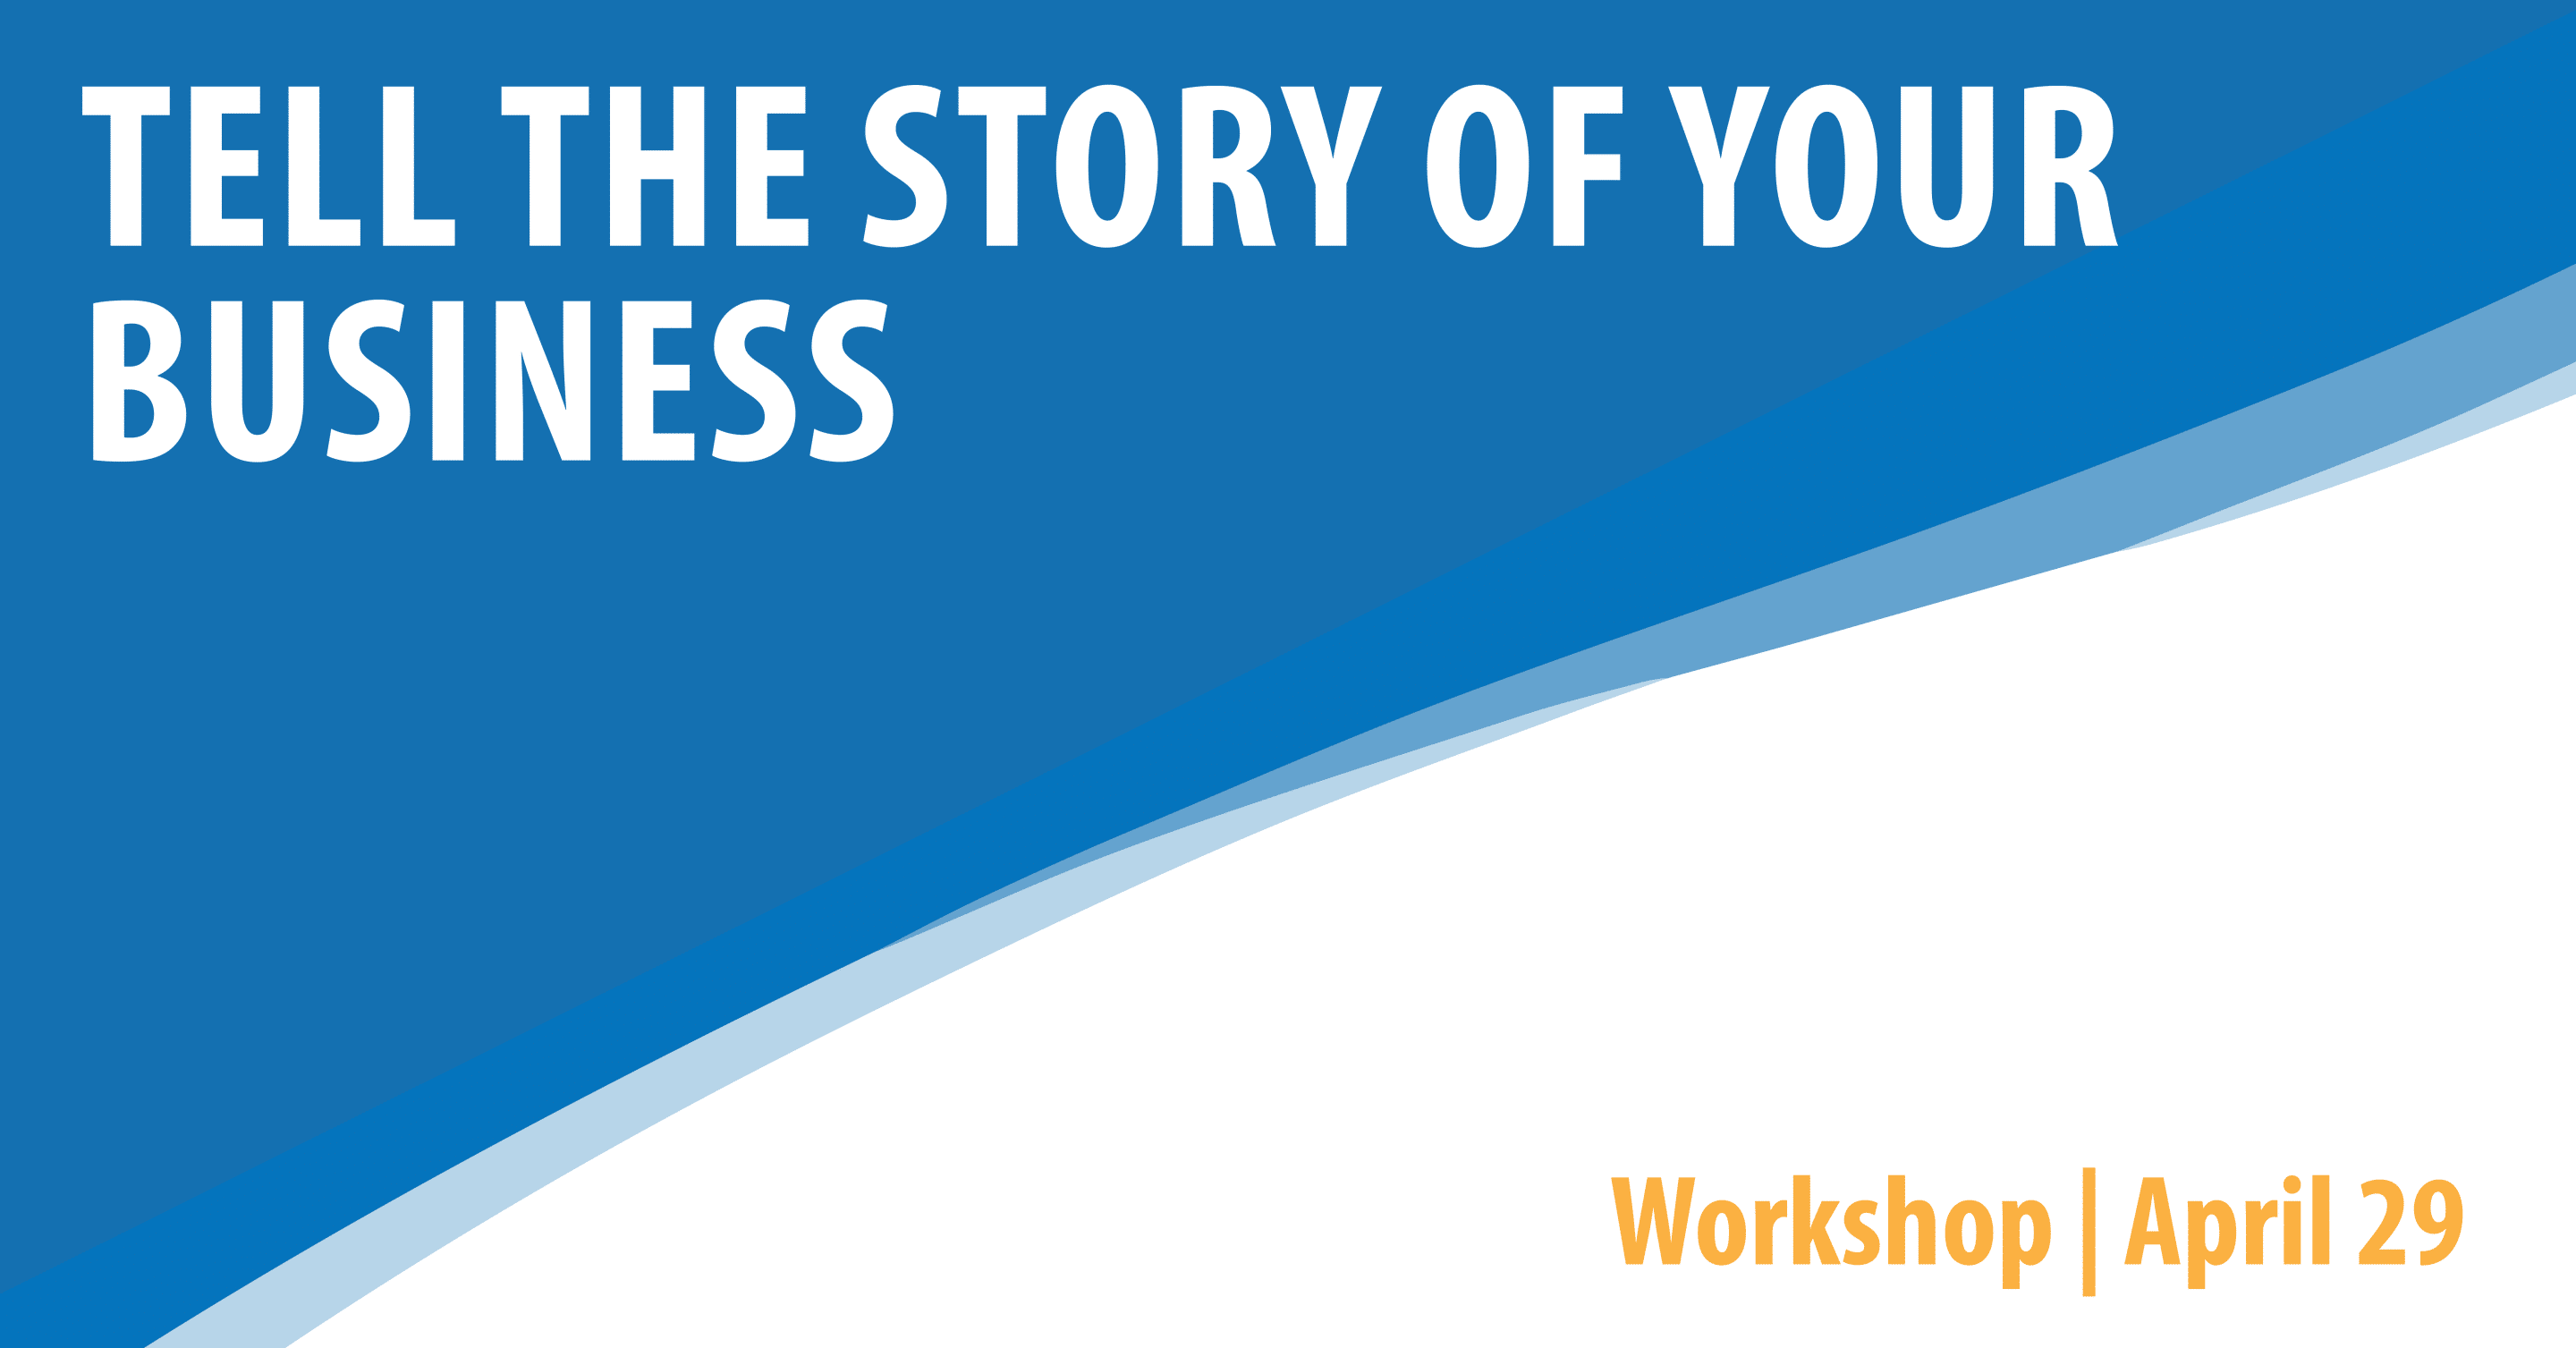 Tell the Story of Your Business